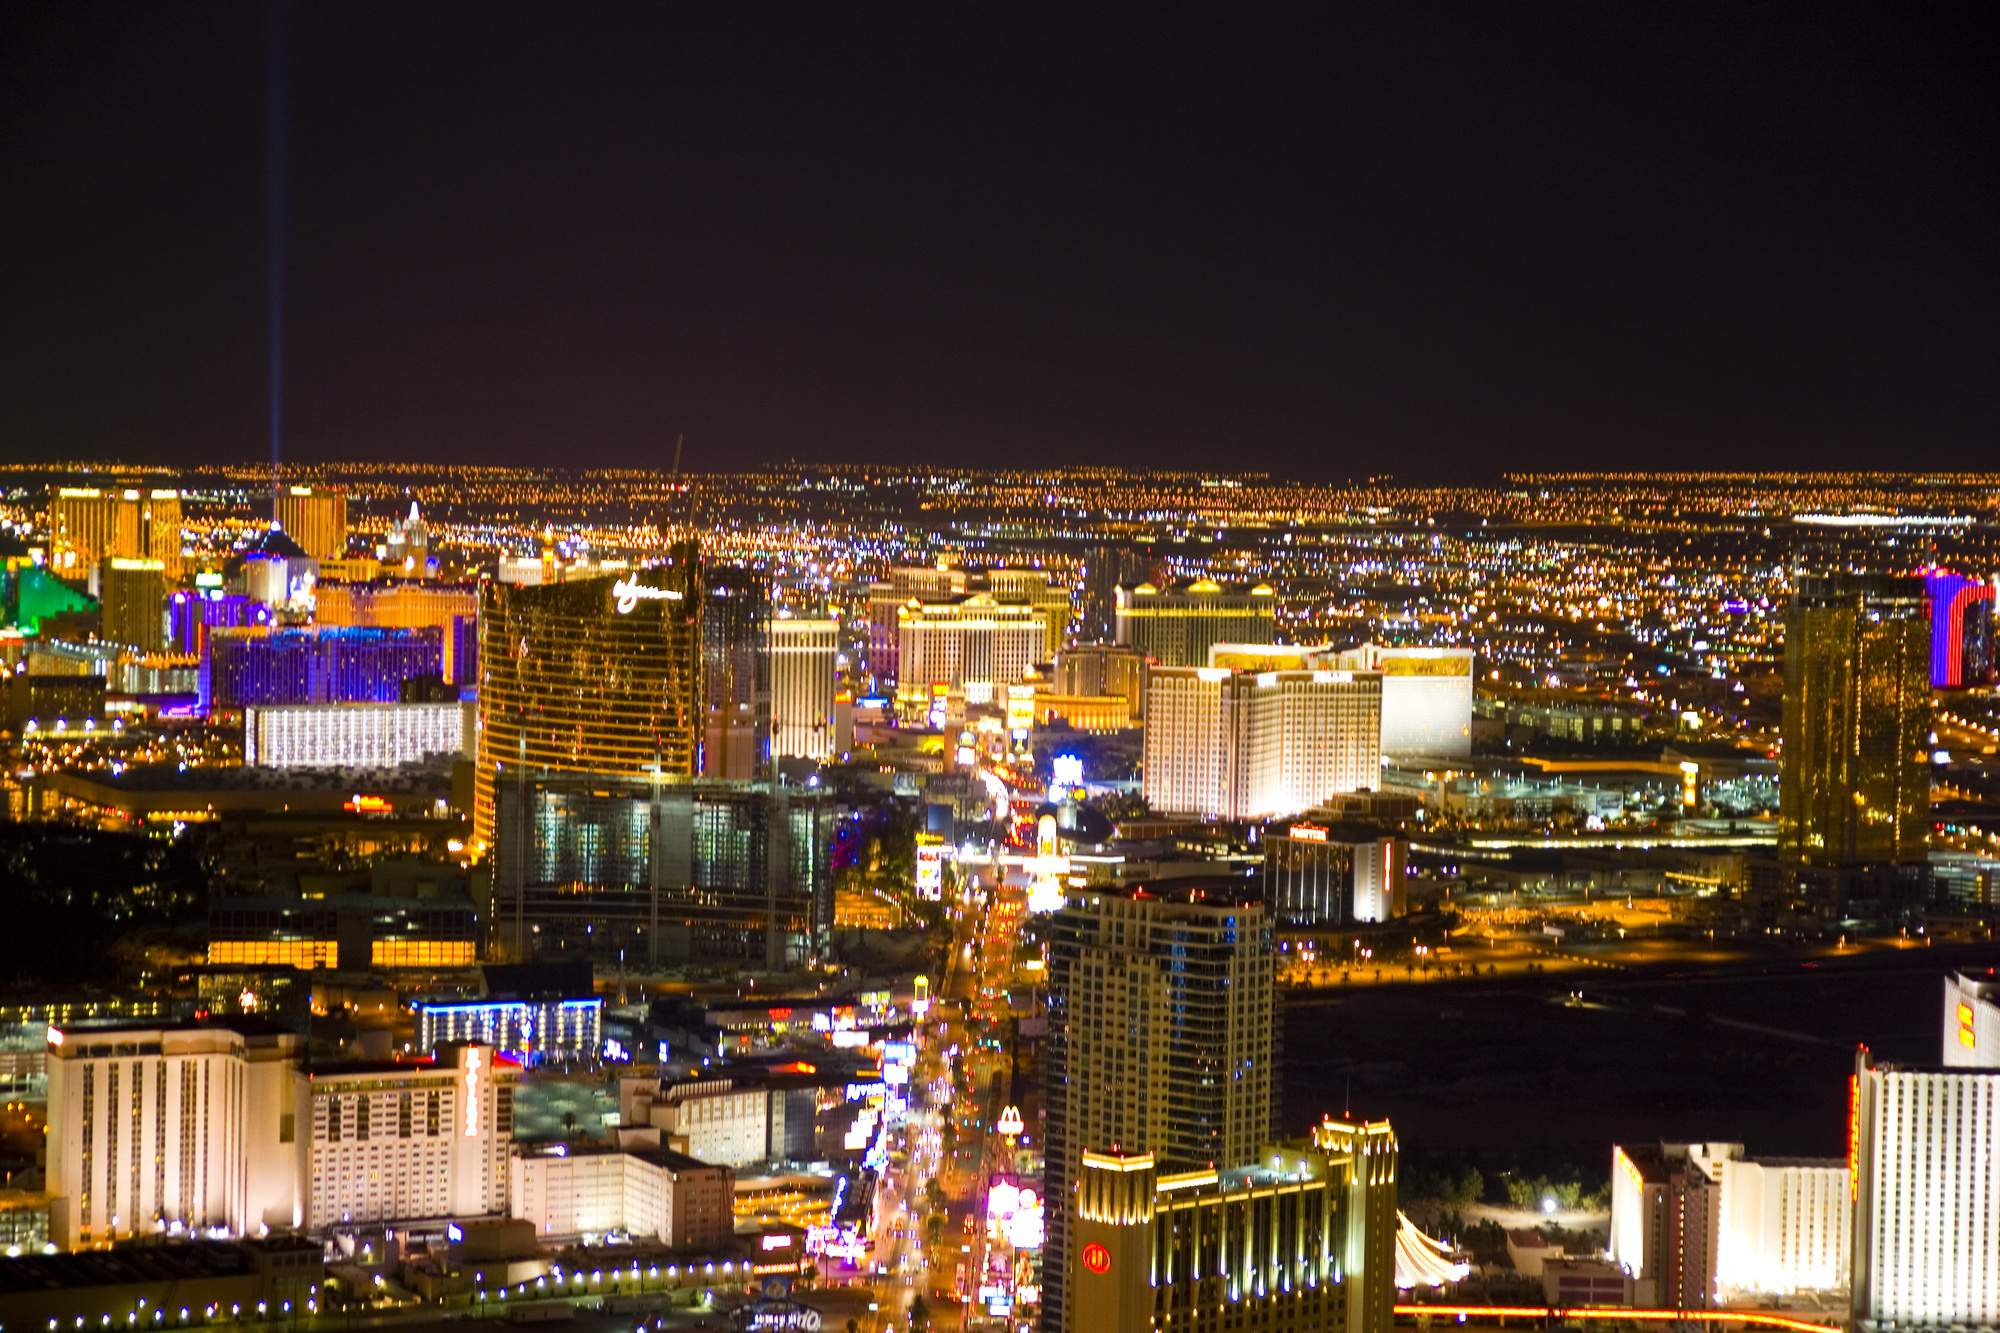 7 Things to Do When Visiting Las Vegas